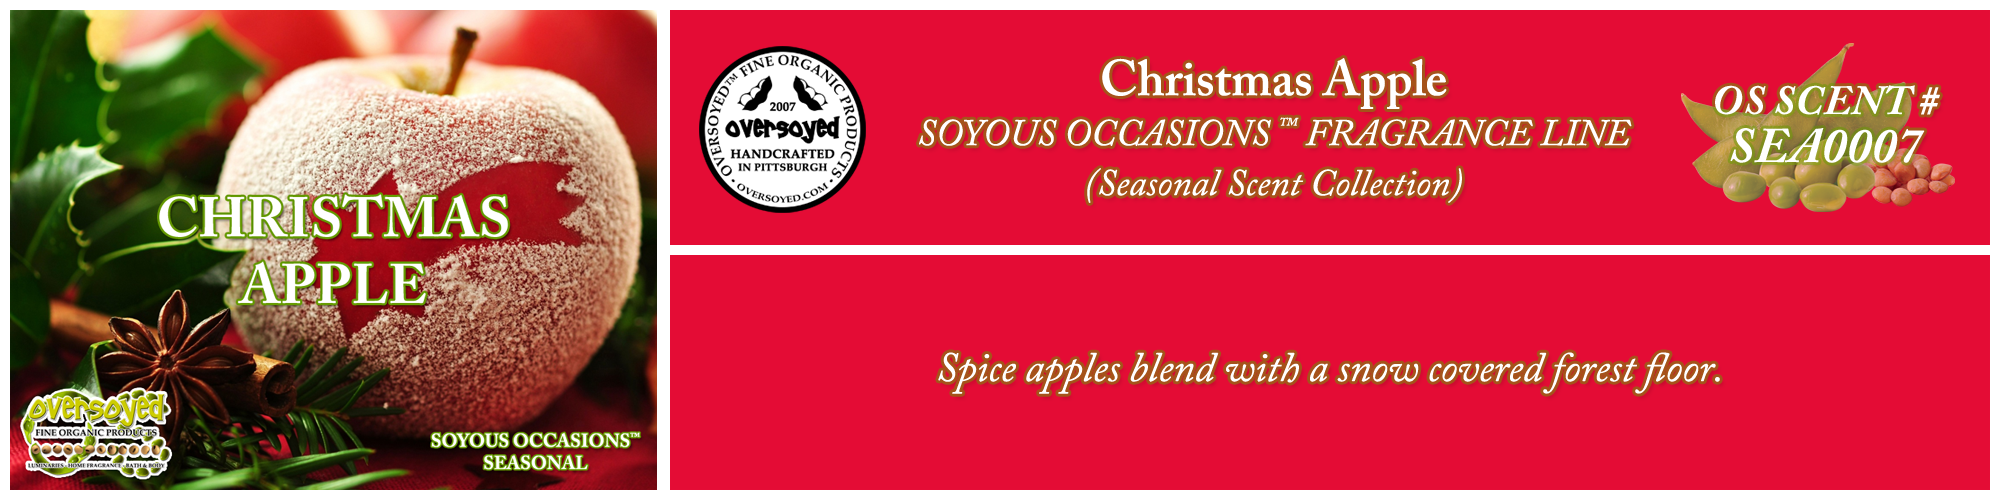 Christmas Apple Handcrafted Products Collection